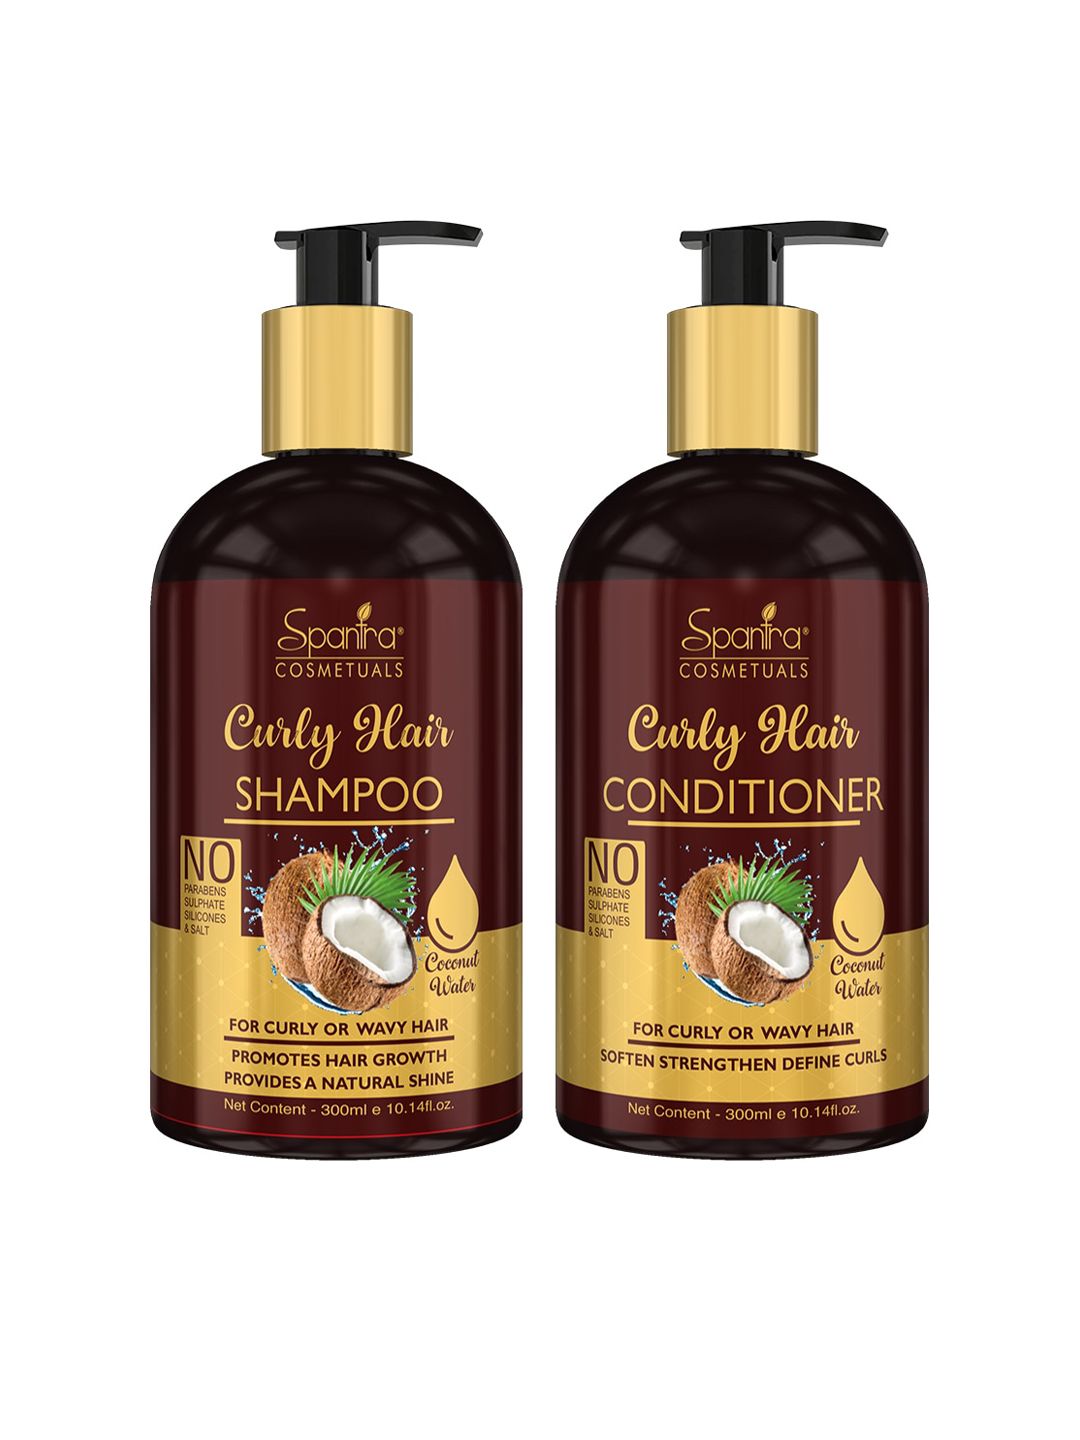 Spantra Curly Hair Shampoo & Conditioner Combo 600 ml Price in India